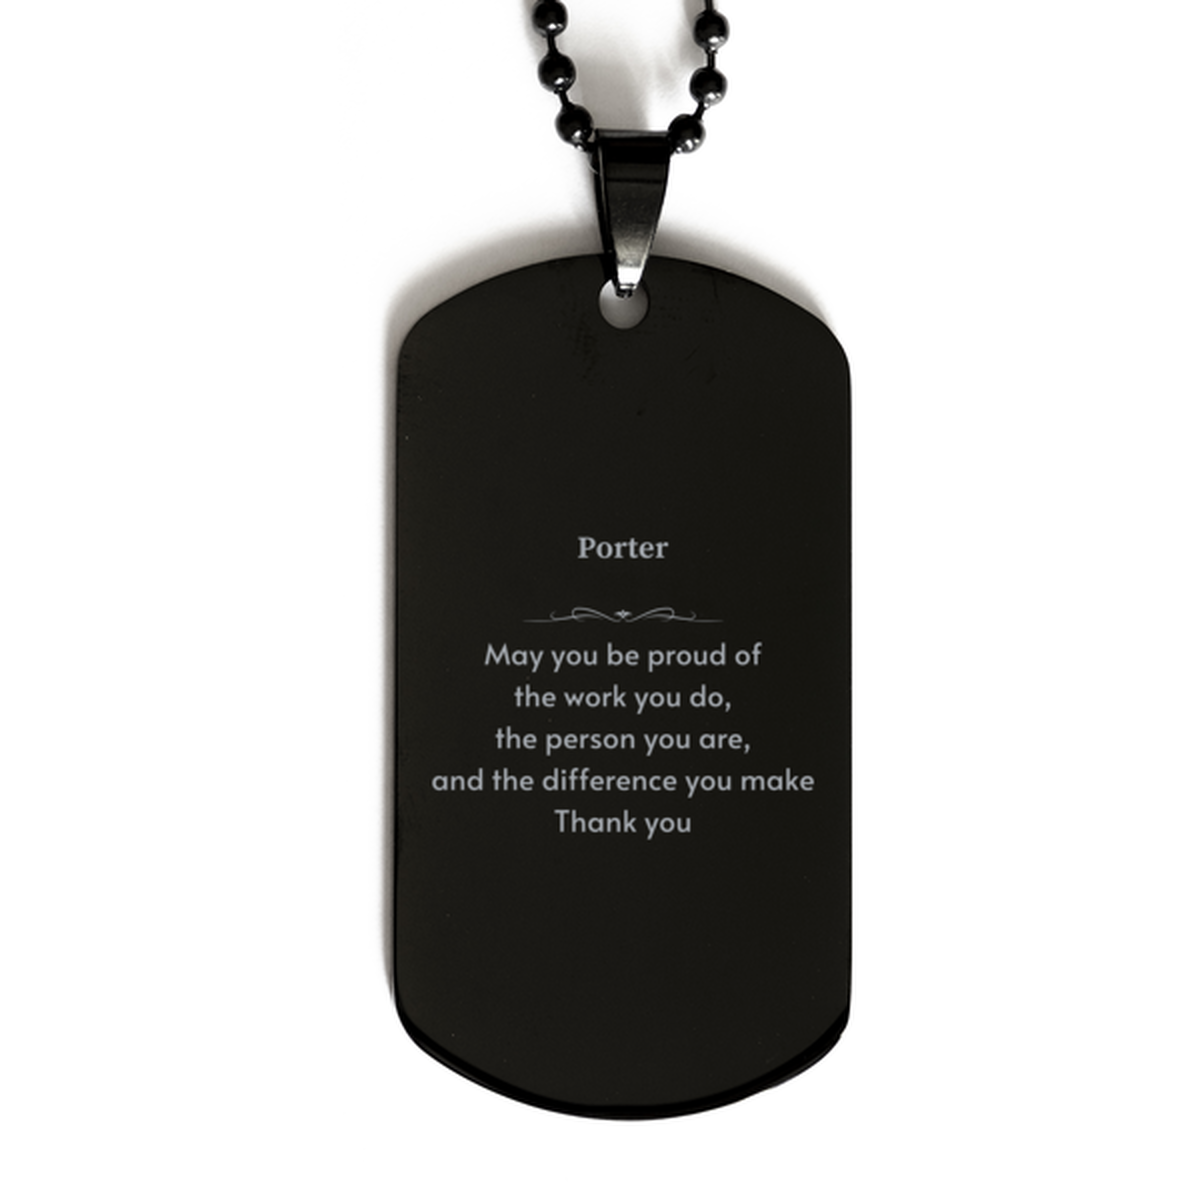 Heartwarming Black Dog Tag Retirement Coworkers Gifts for Porter, Porter May You be proud of the work you do, the person you are Gifts for Boss Men Women Friends